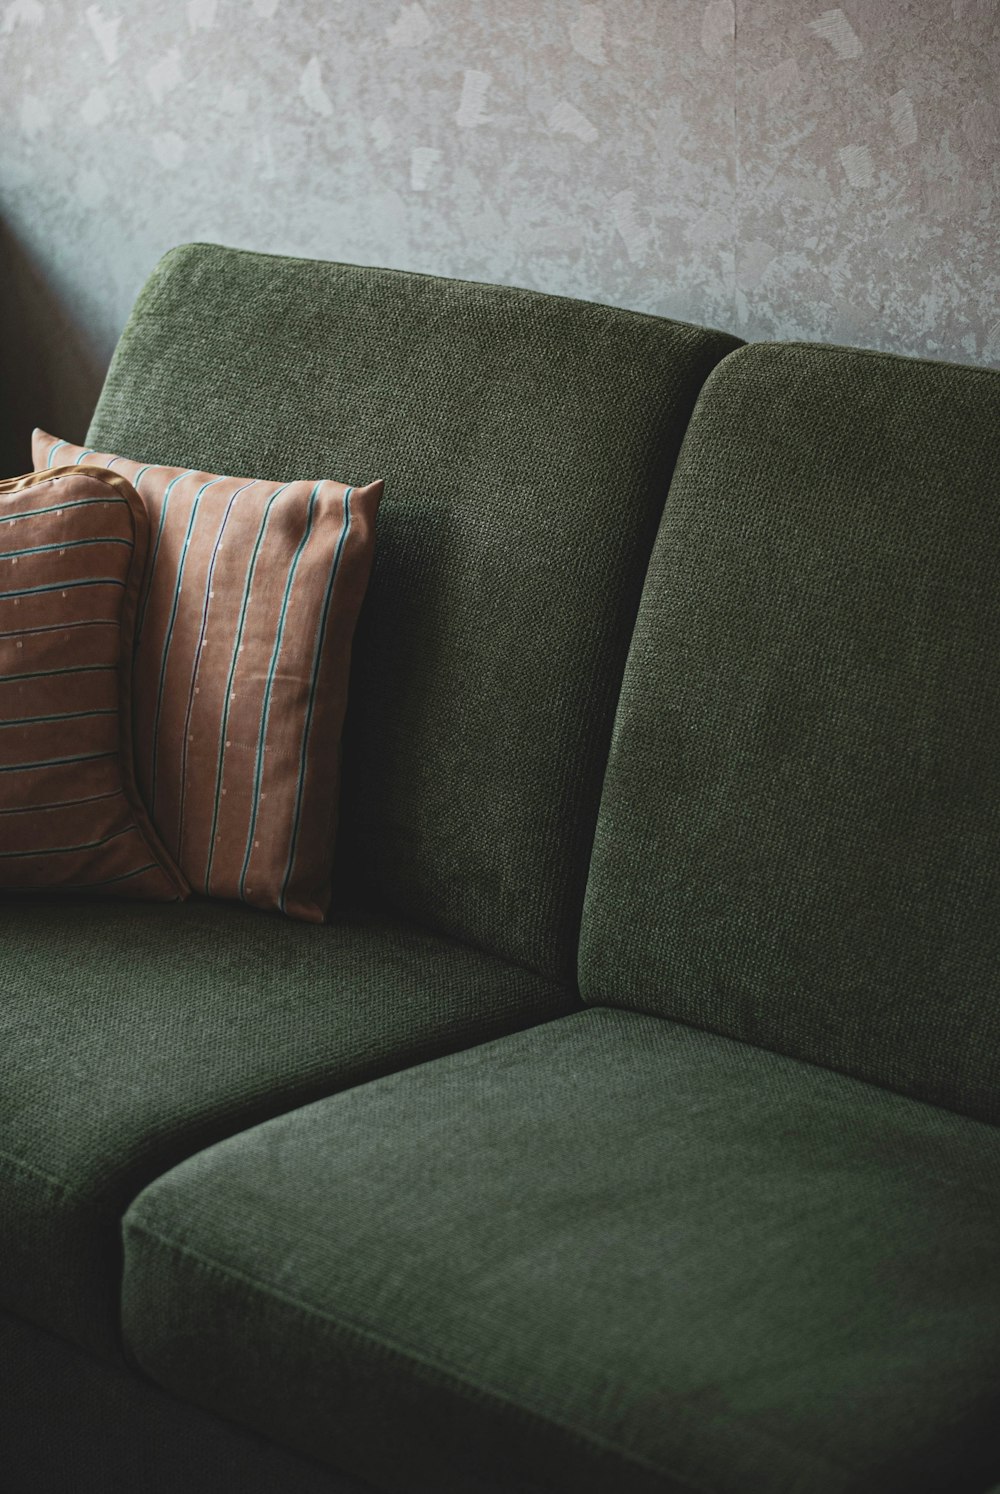 brown throw pillow on gray couch